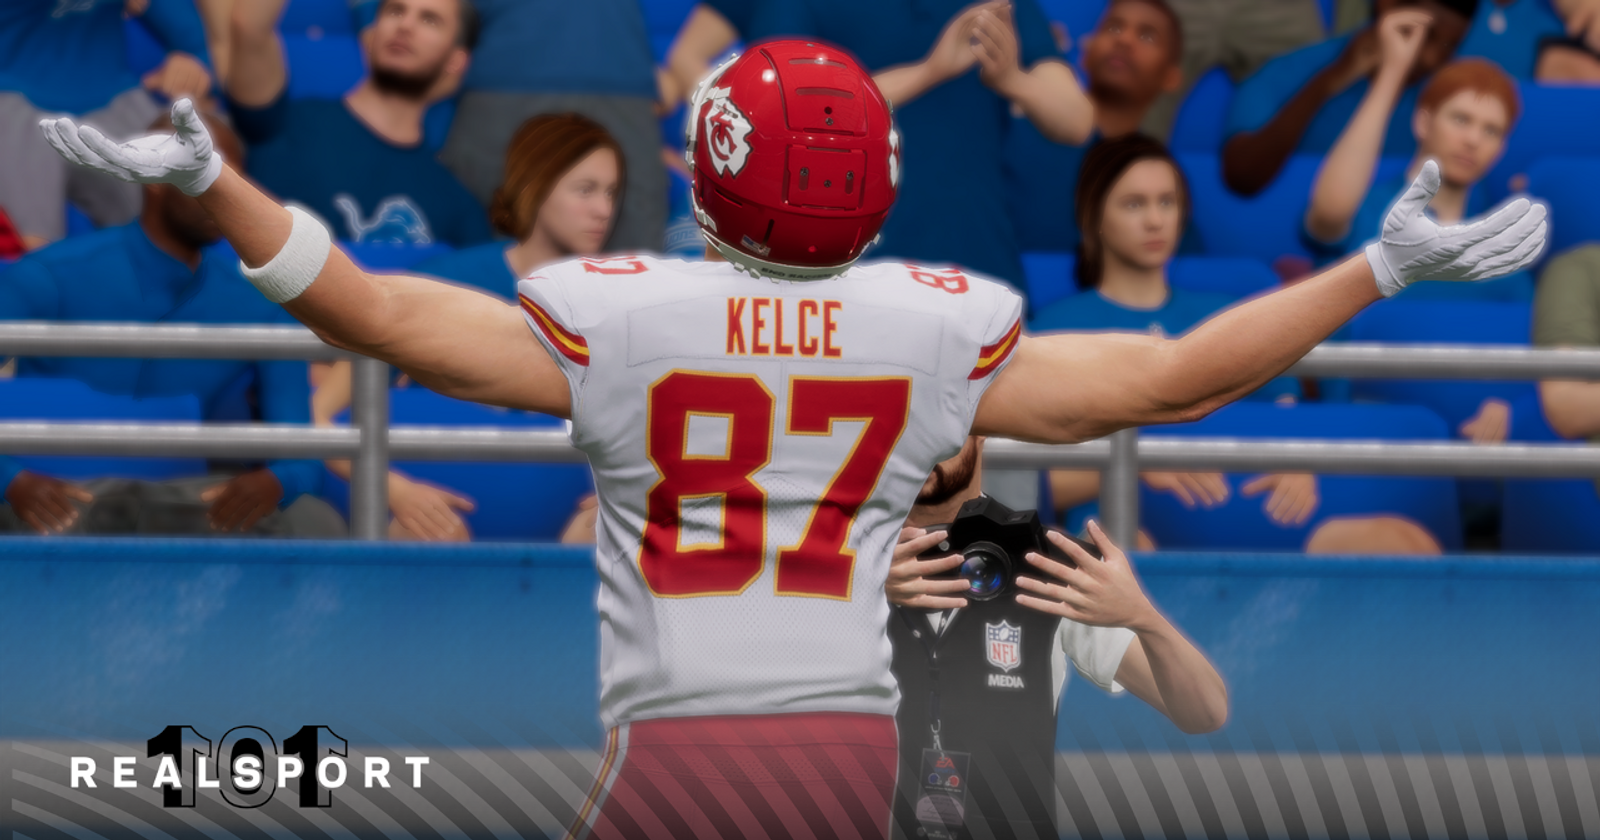 Madden 23 ratings: the best players for each position - Video Games on  Sports Illustrated